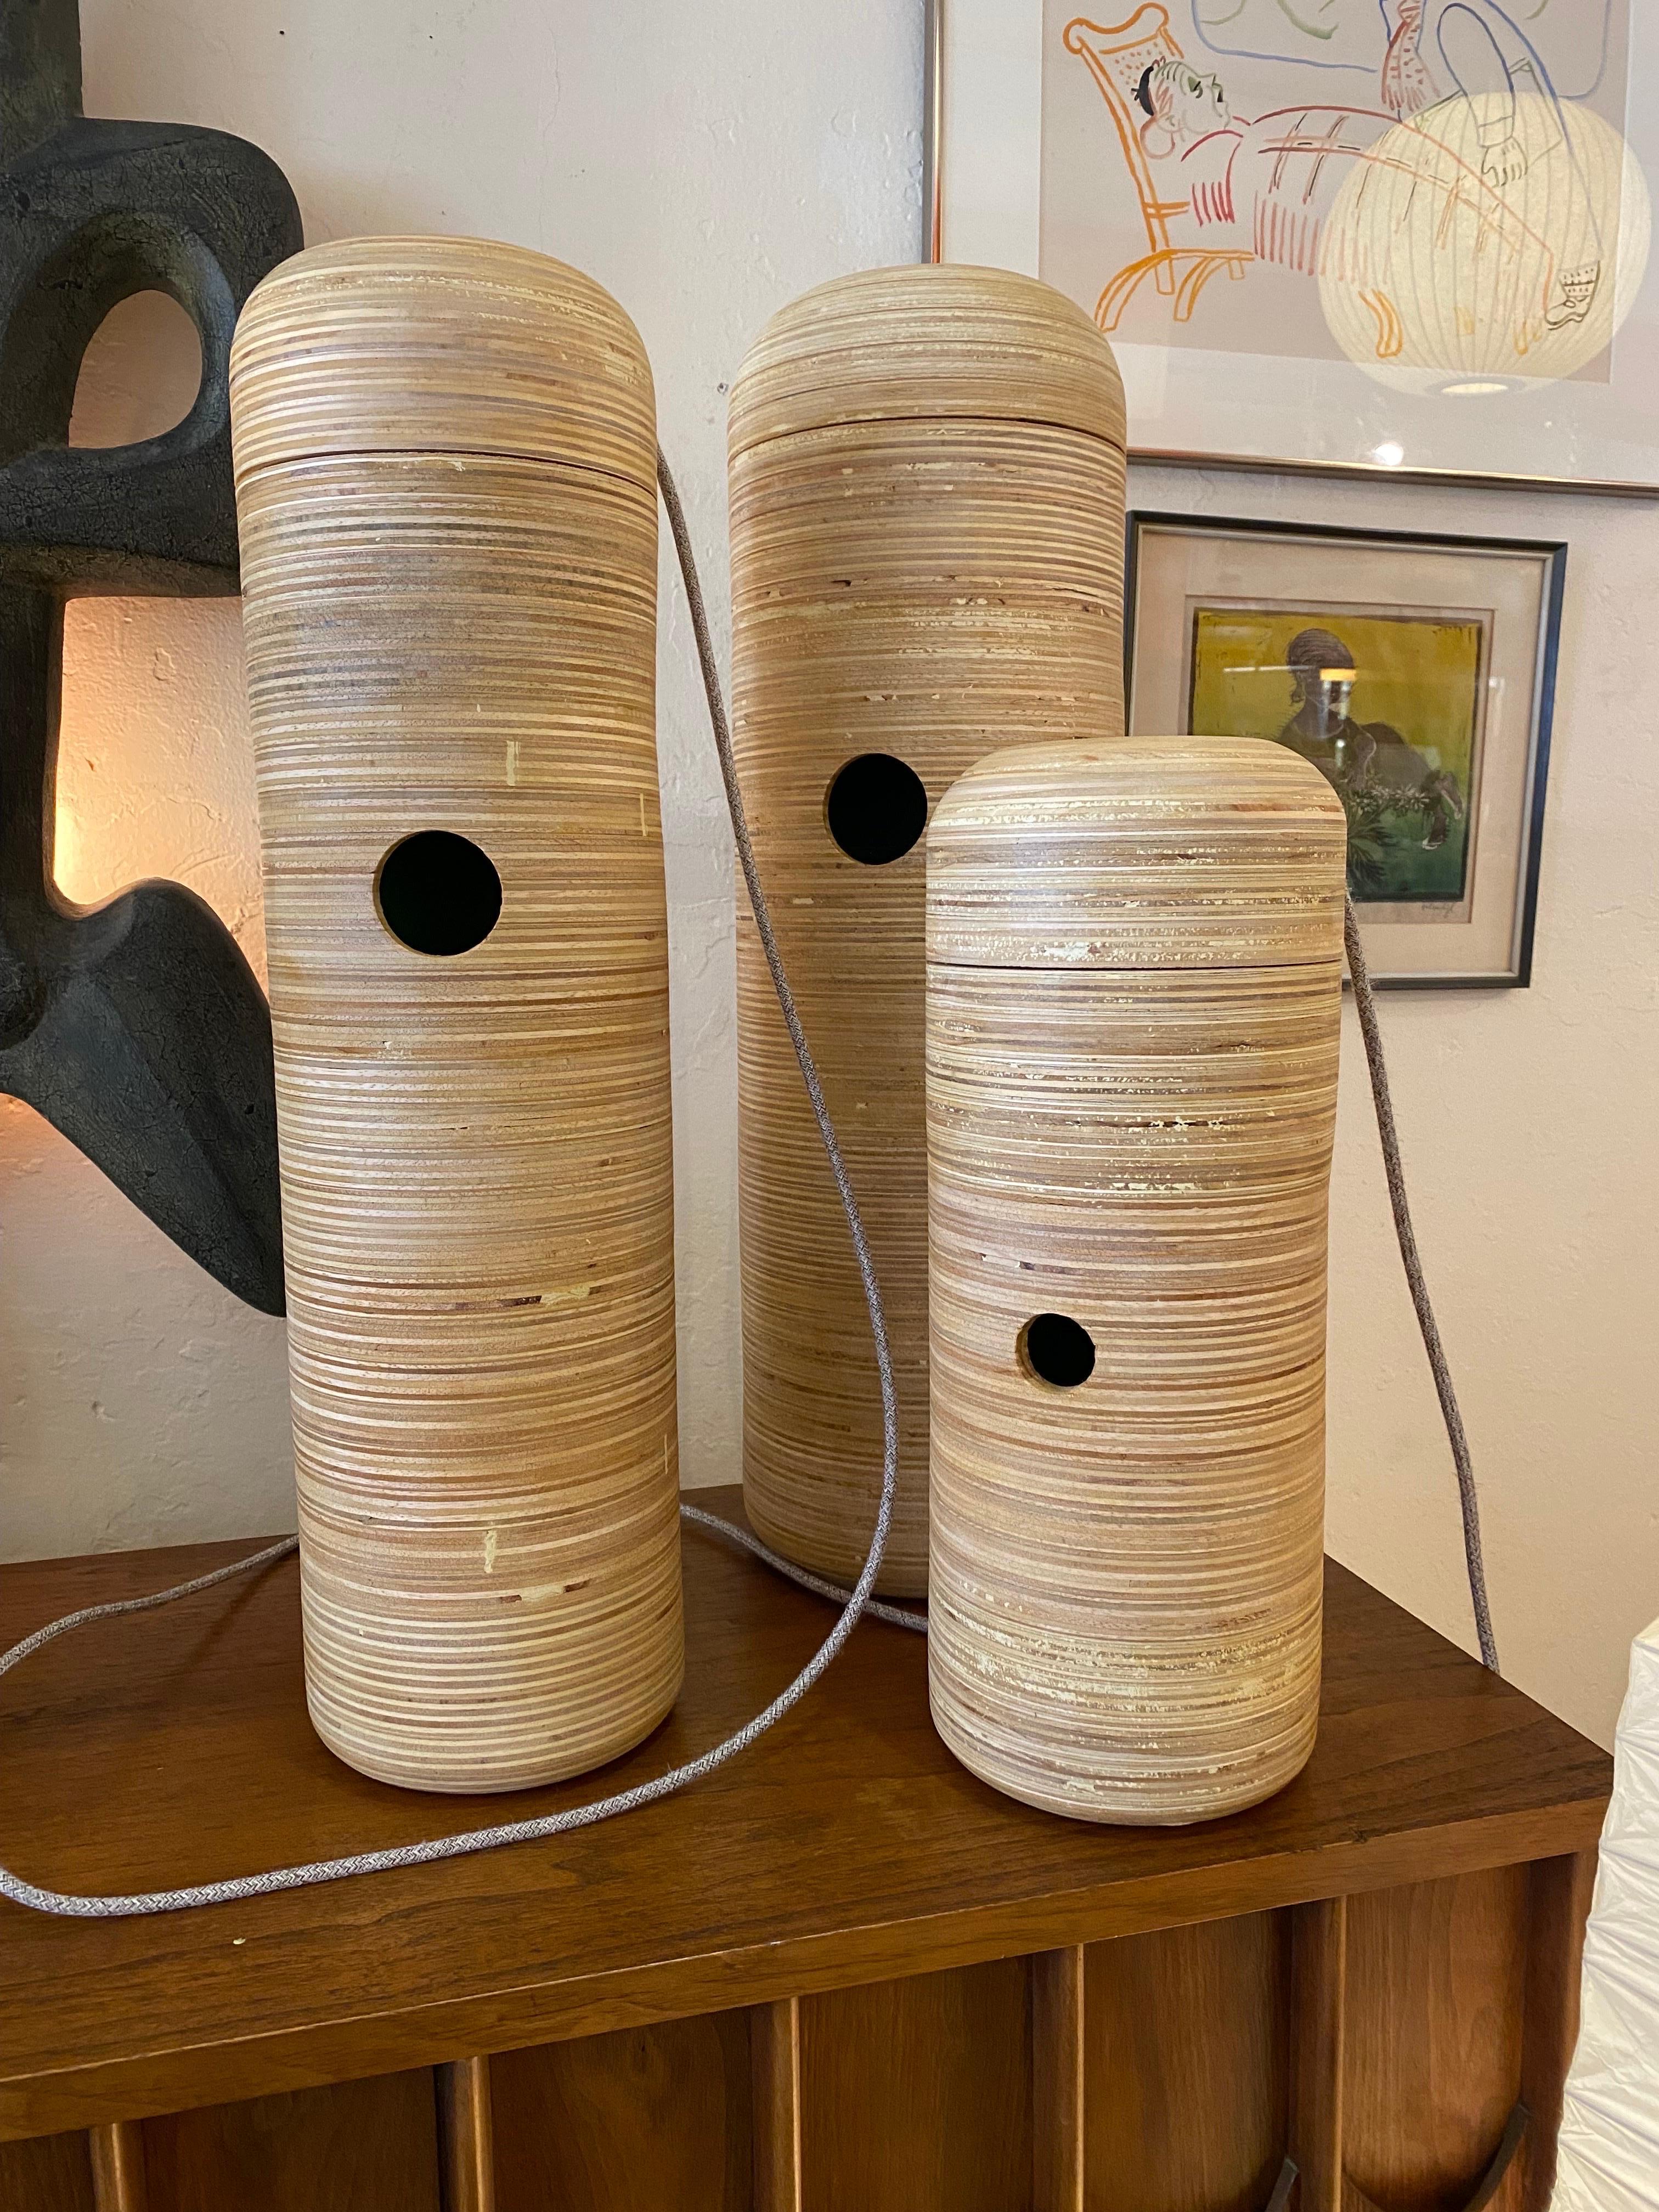 Totem Lamps includes a set of three lamps of three sizes (8